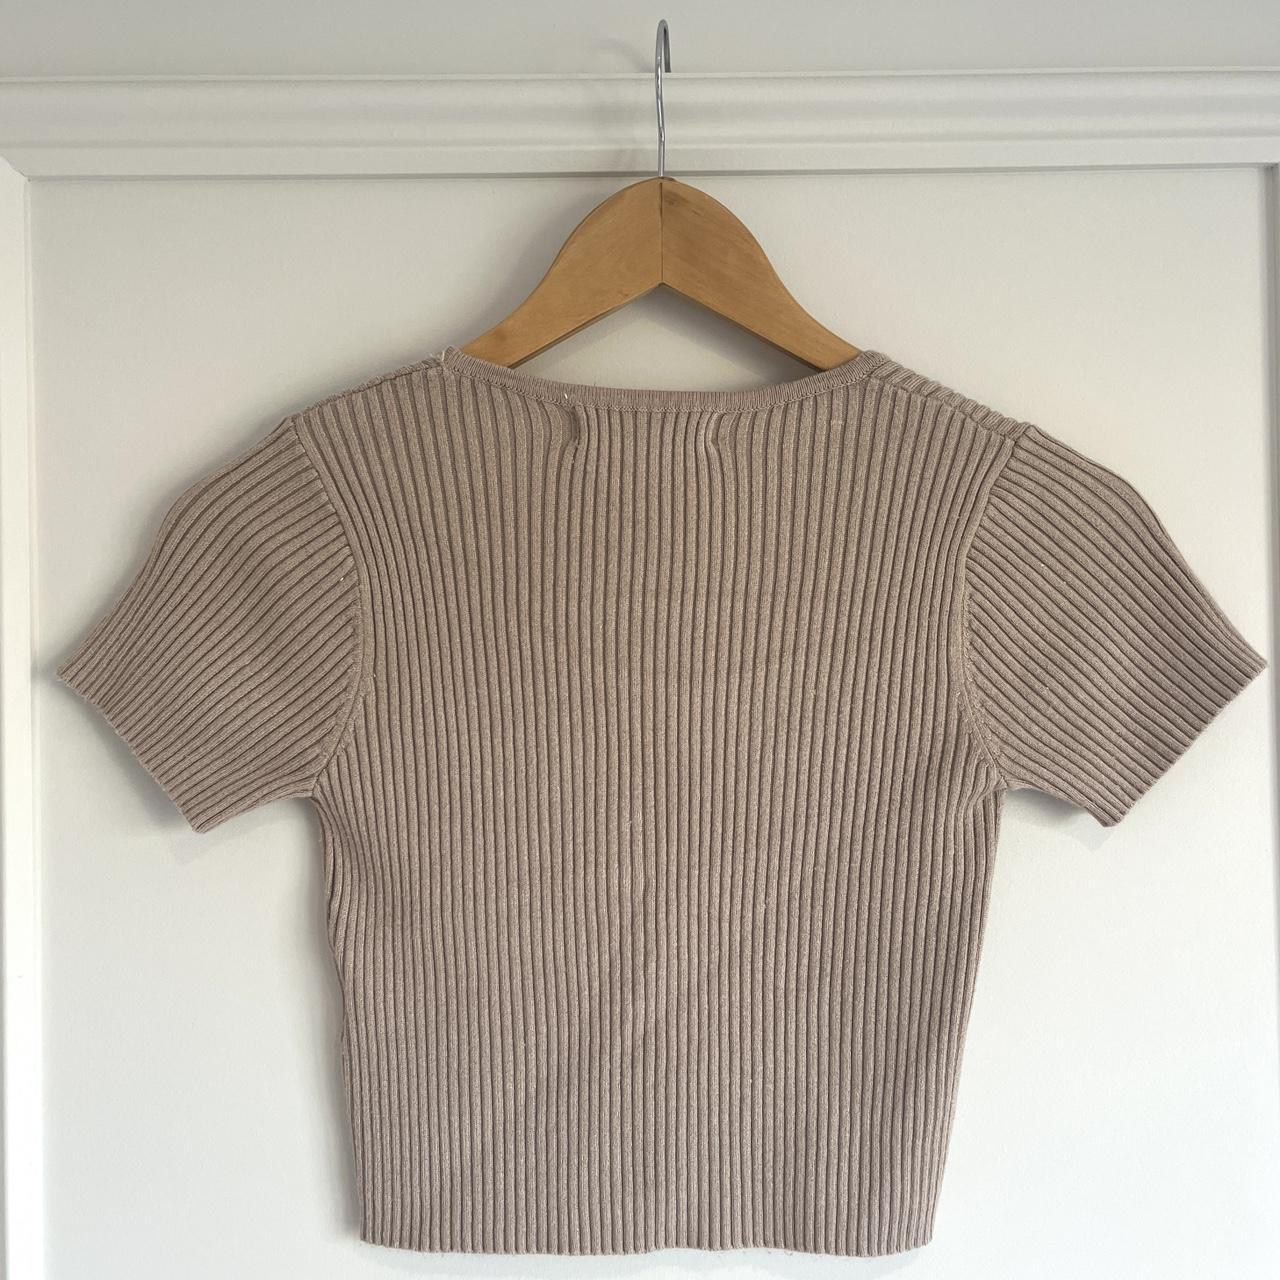 Ribbed crop top Great condition Size: 6 Price: $15 - Depop